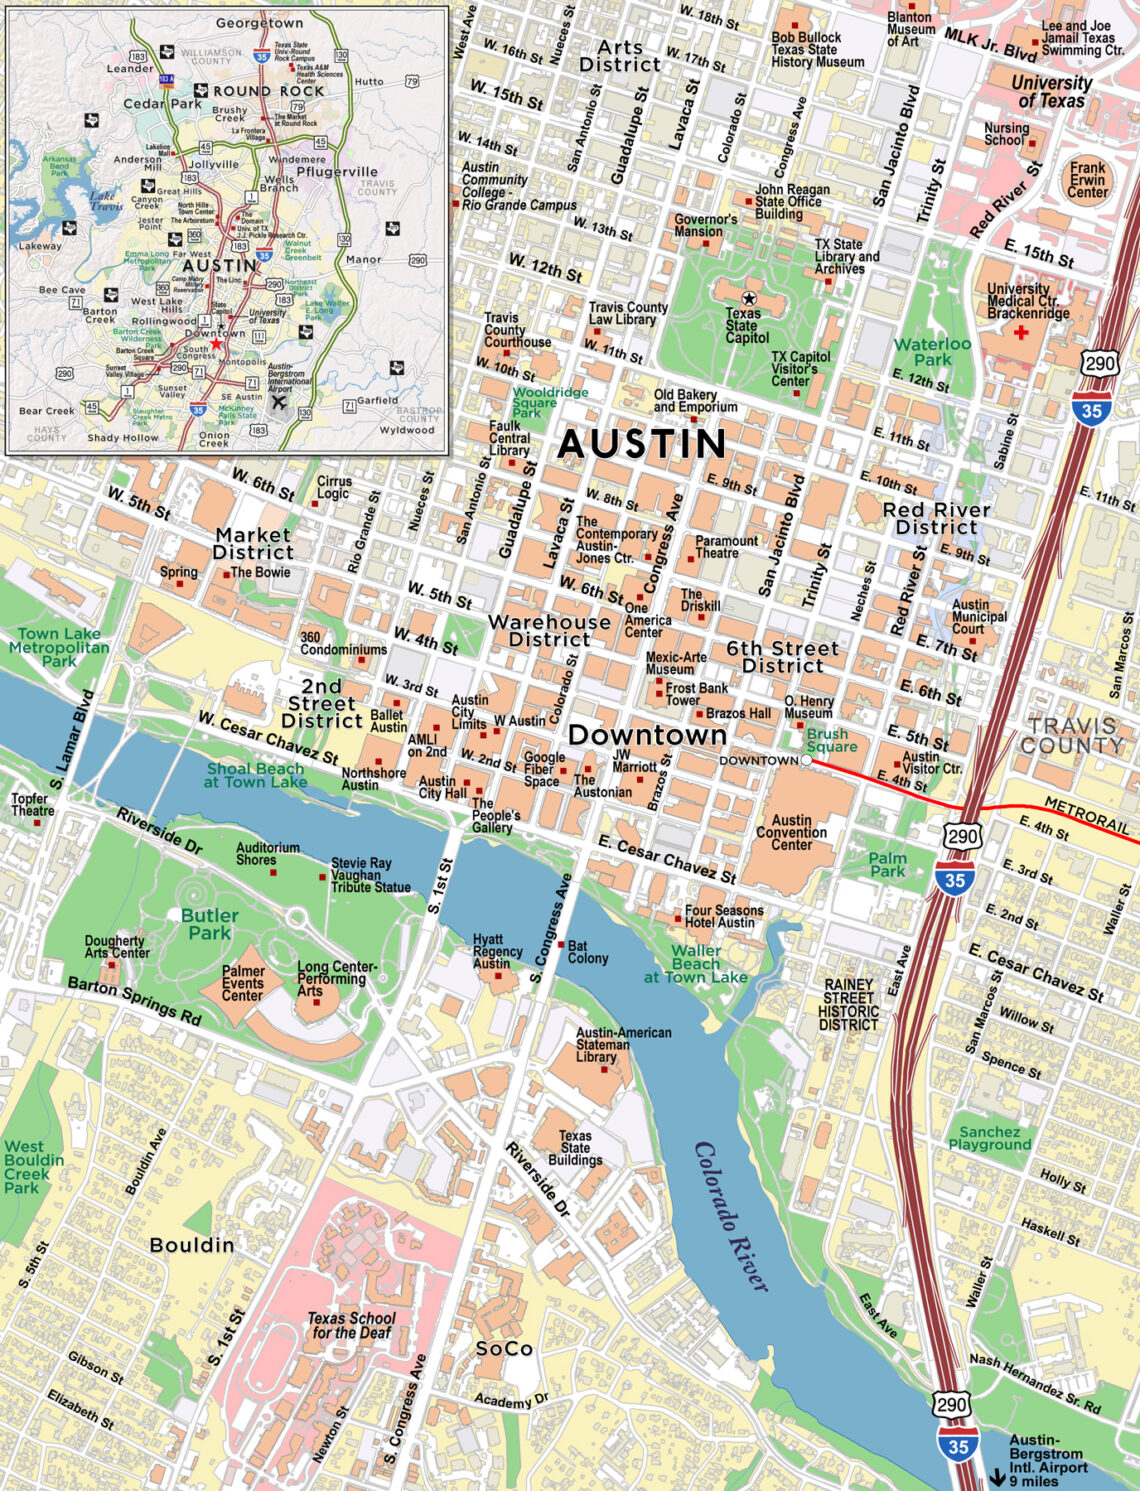 Custom Mapping & GIS Service in Greater Austin, TX Area - Red Paw Technologies